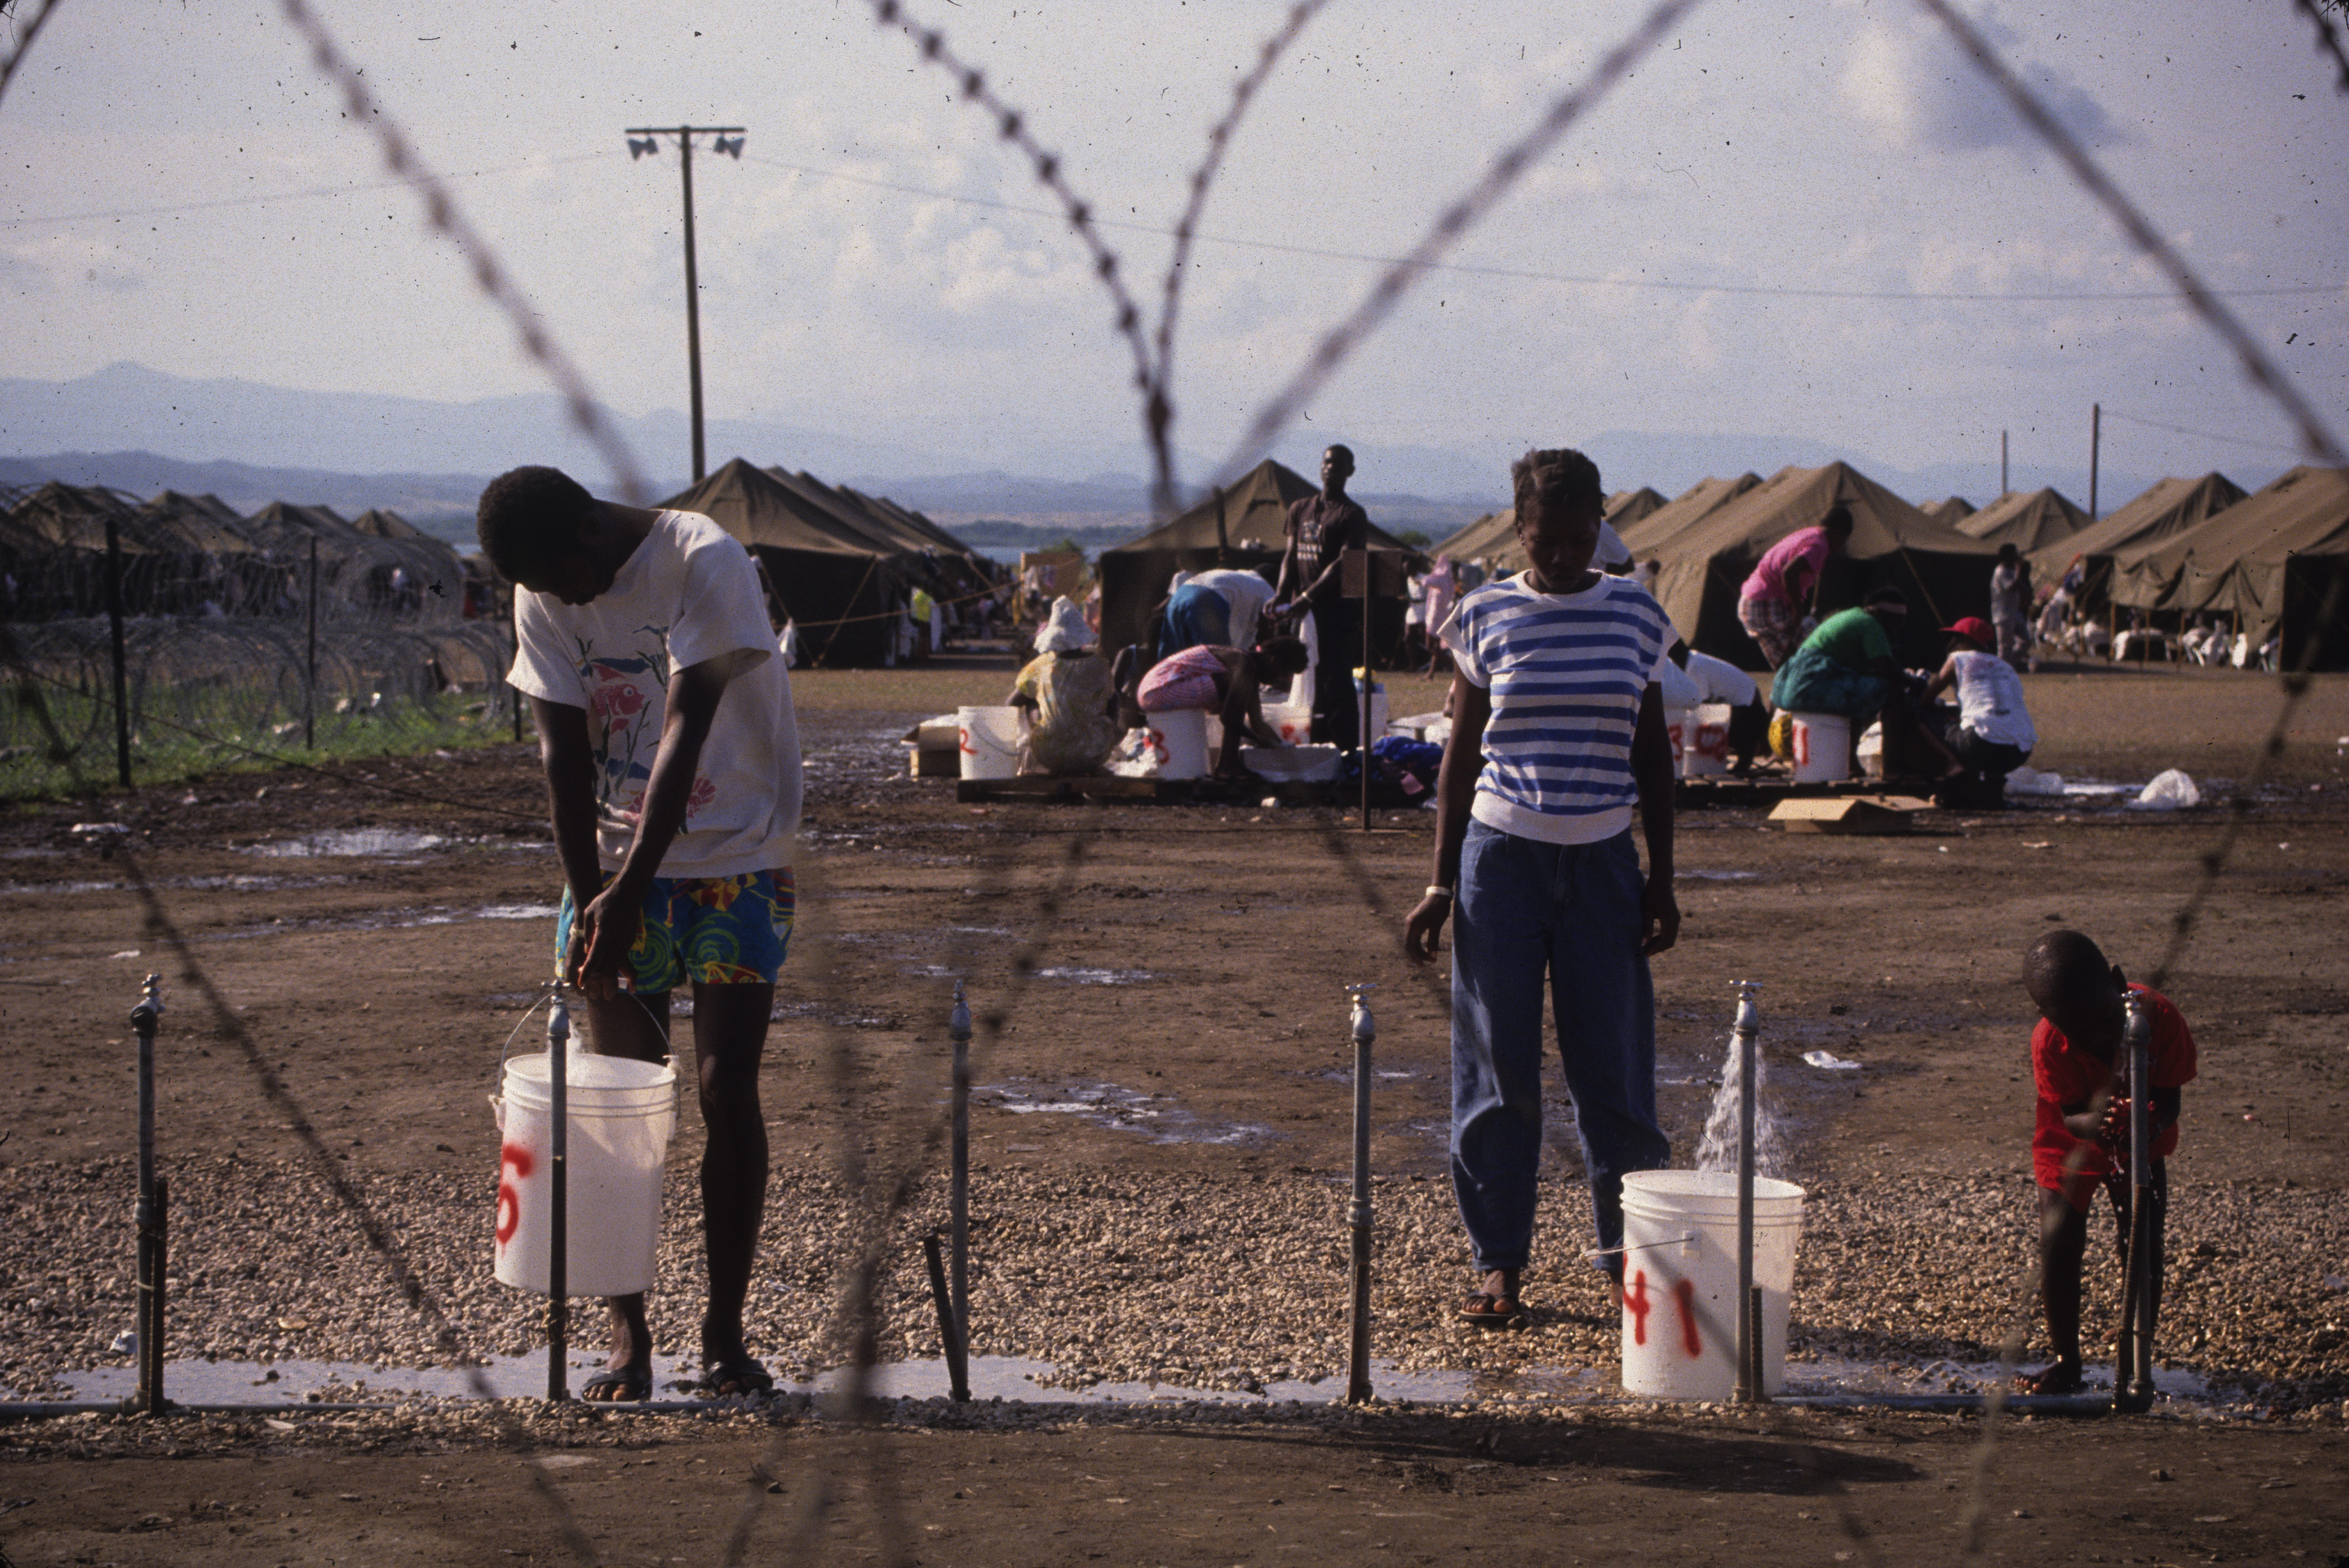 Refugees filling up water buckets at Camp McCalla, 12.31.91